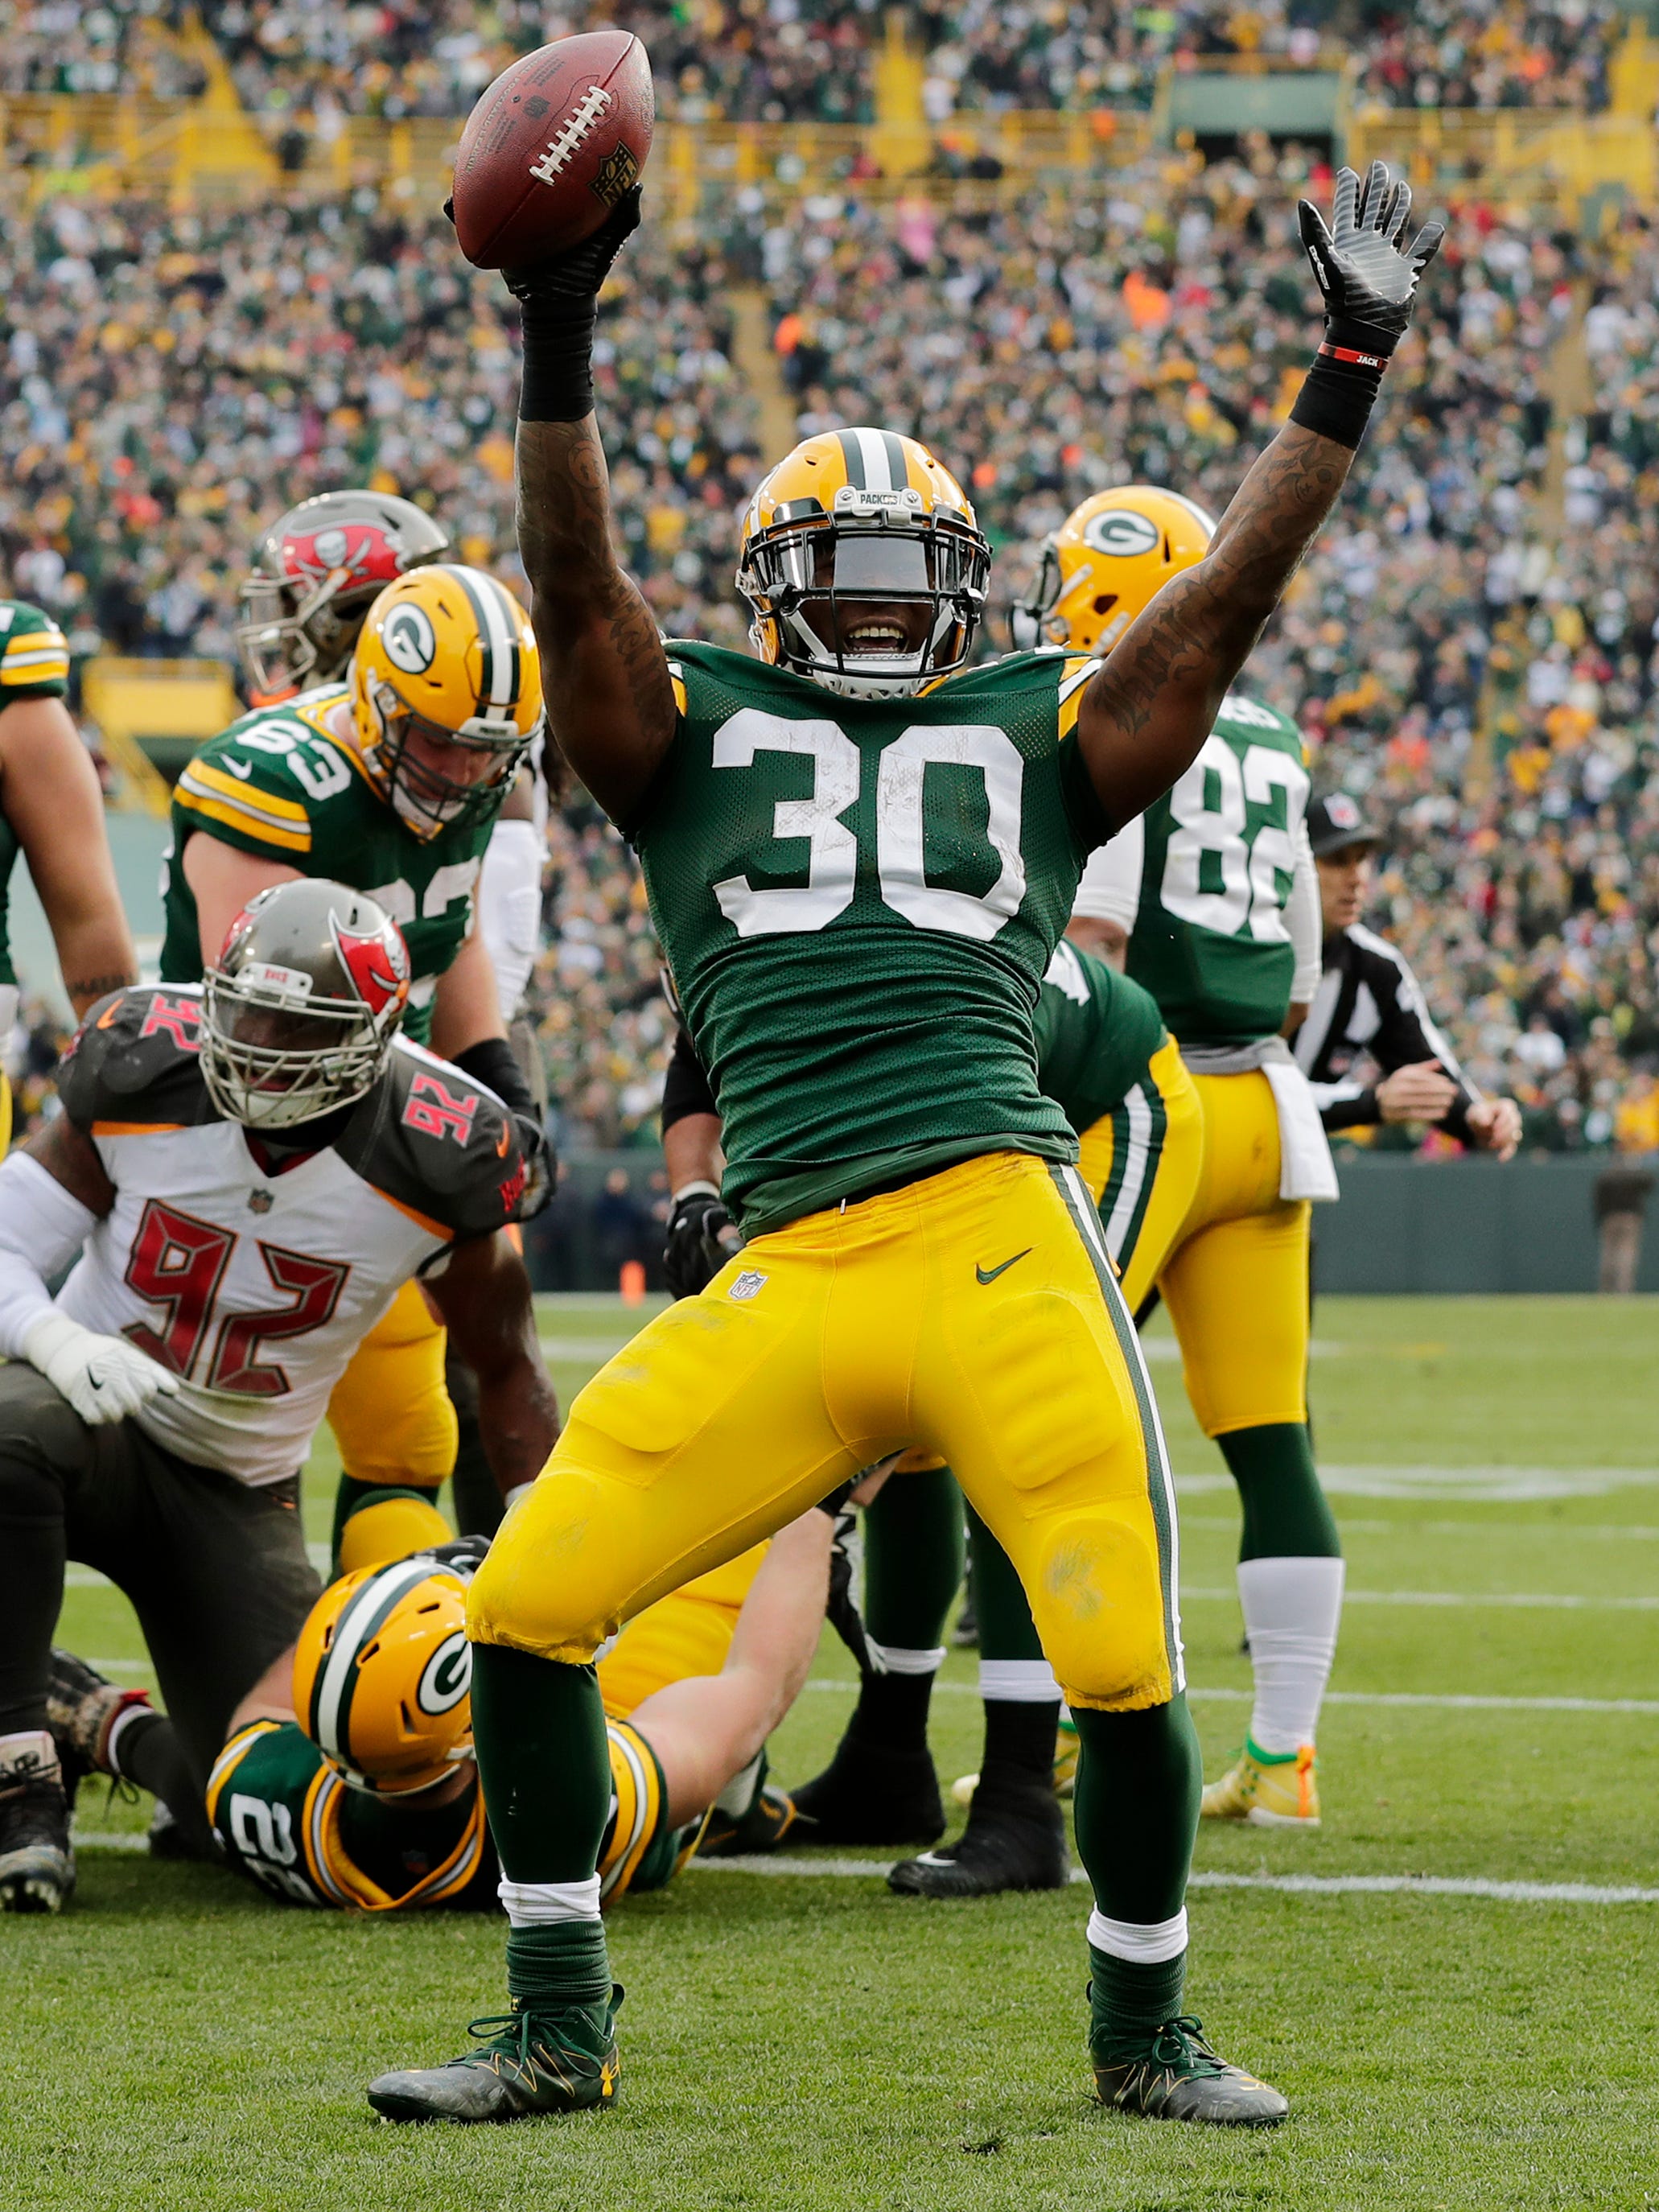 Green Bay Packers running back Jamaal Williams (30) celebrates after scoring a touchdown against the Tampa Bay Buccaneers in the second quarter at Lambeau Field on Sunday, December 3, 2017 in Green Bay, Wis.